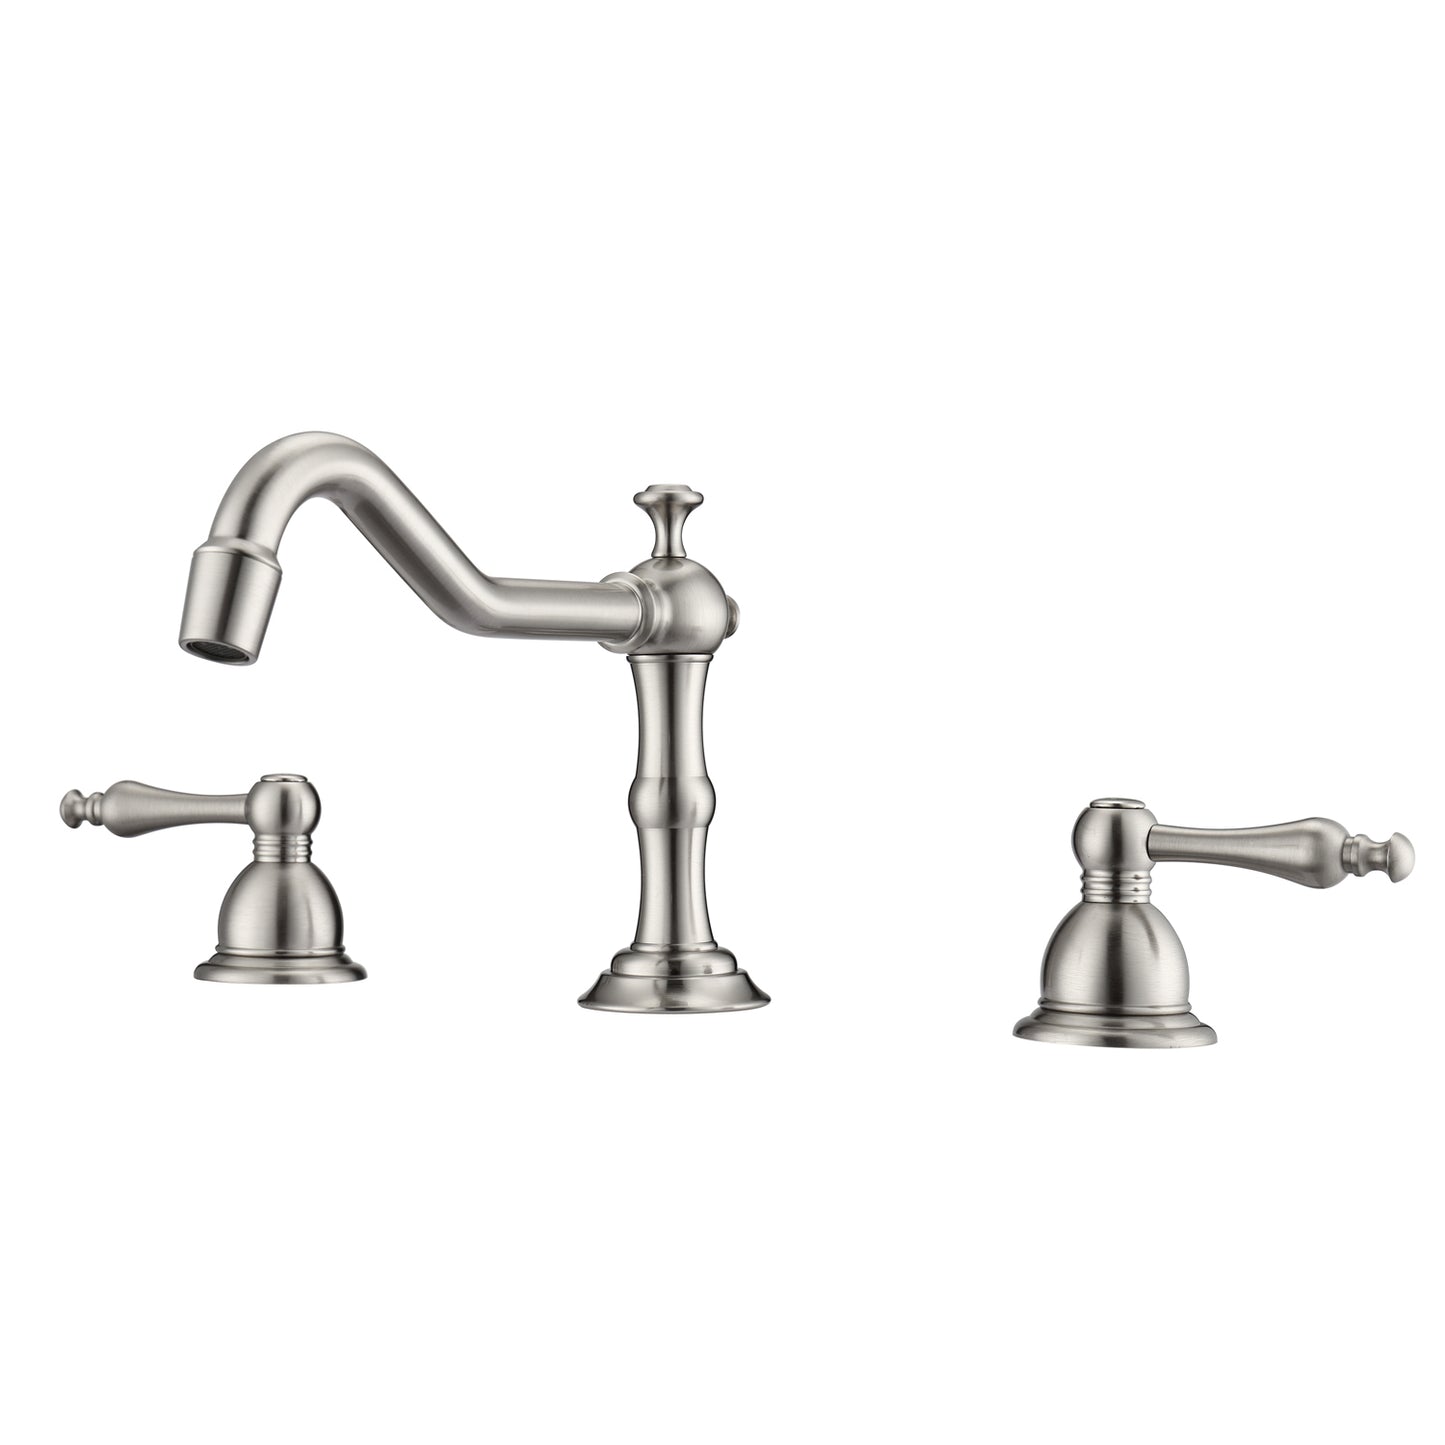 Roma 8" Widespread Brushed Nickel Bathroom Faucet with Metal Lever Handles